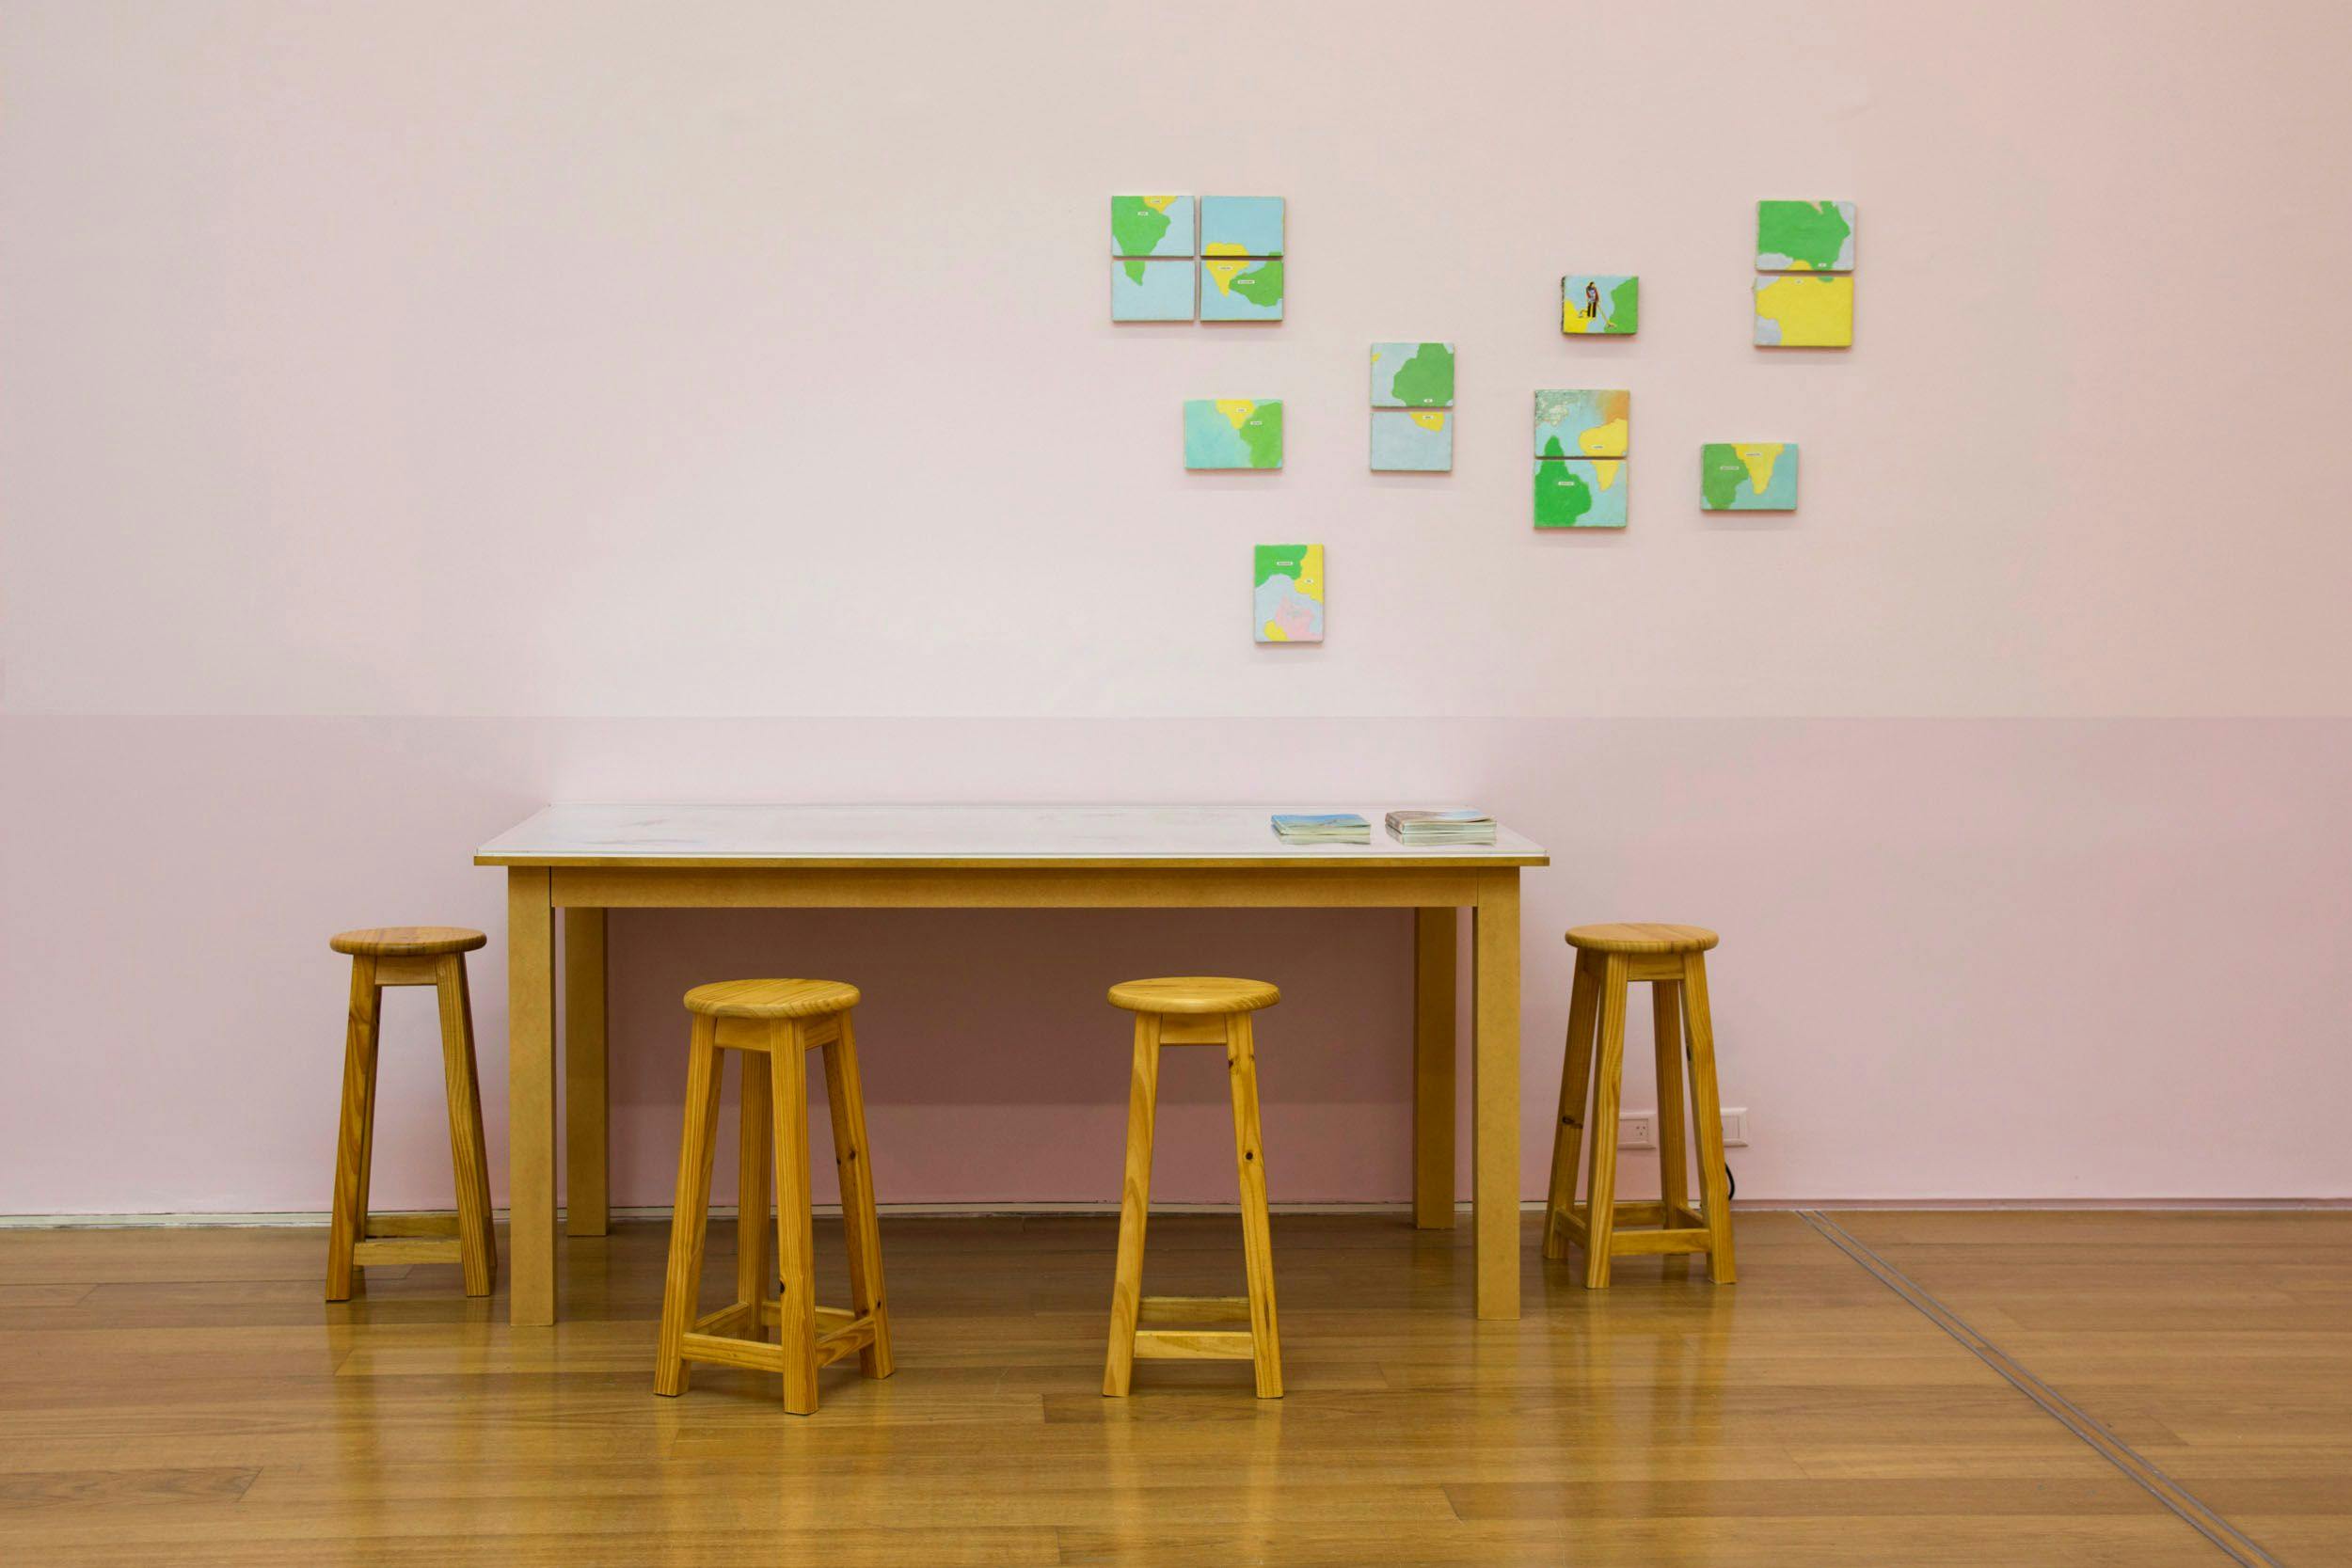 Installation view of the exhibition A Story of Negotiation¬†at Museo de Arte Latinoamericano de Buenos Aires (MALBA) - Fundaci√≥n Costantini, dated 2015 to 2016.